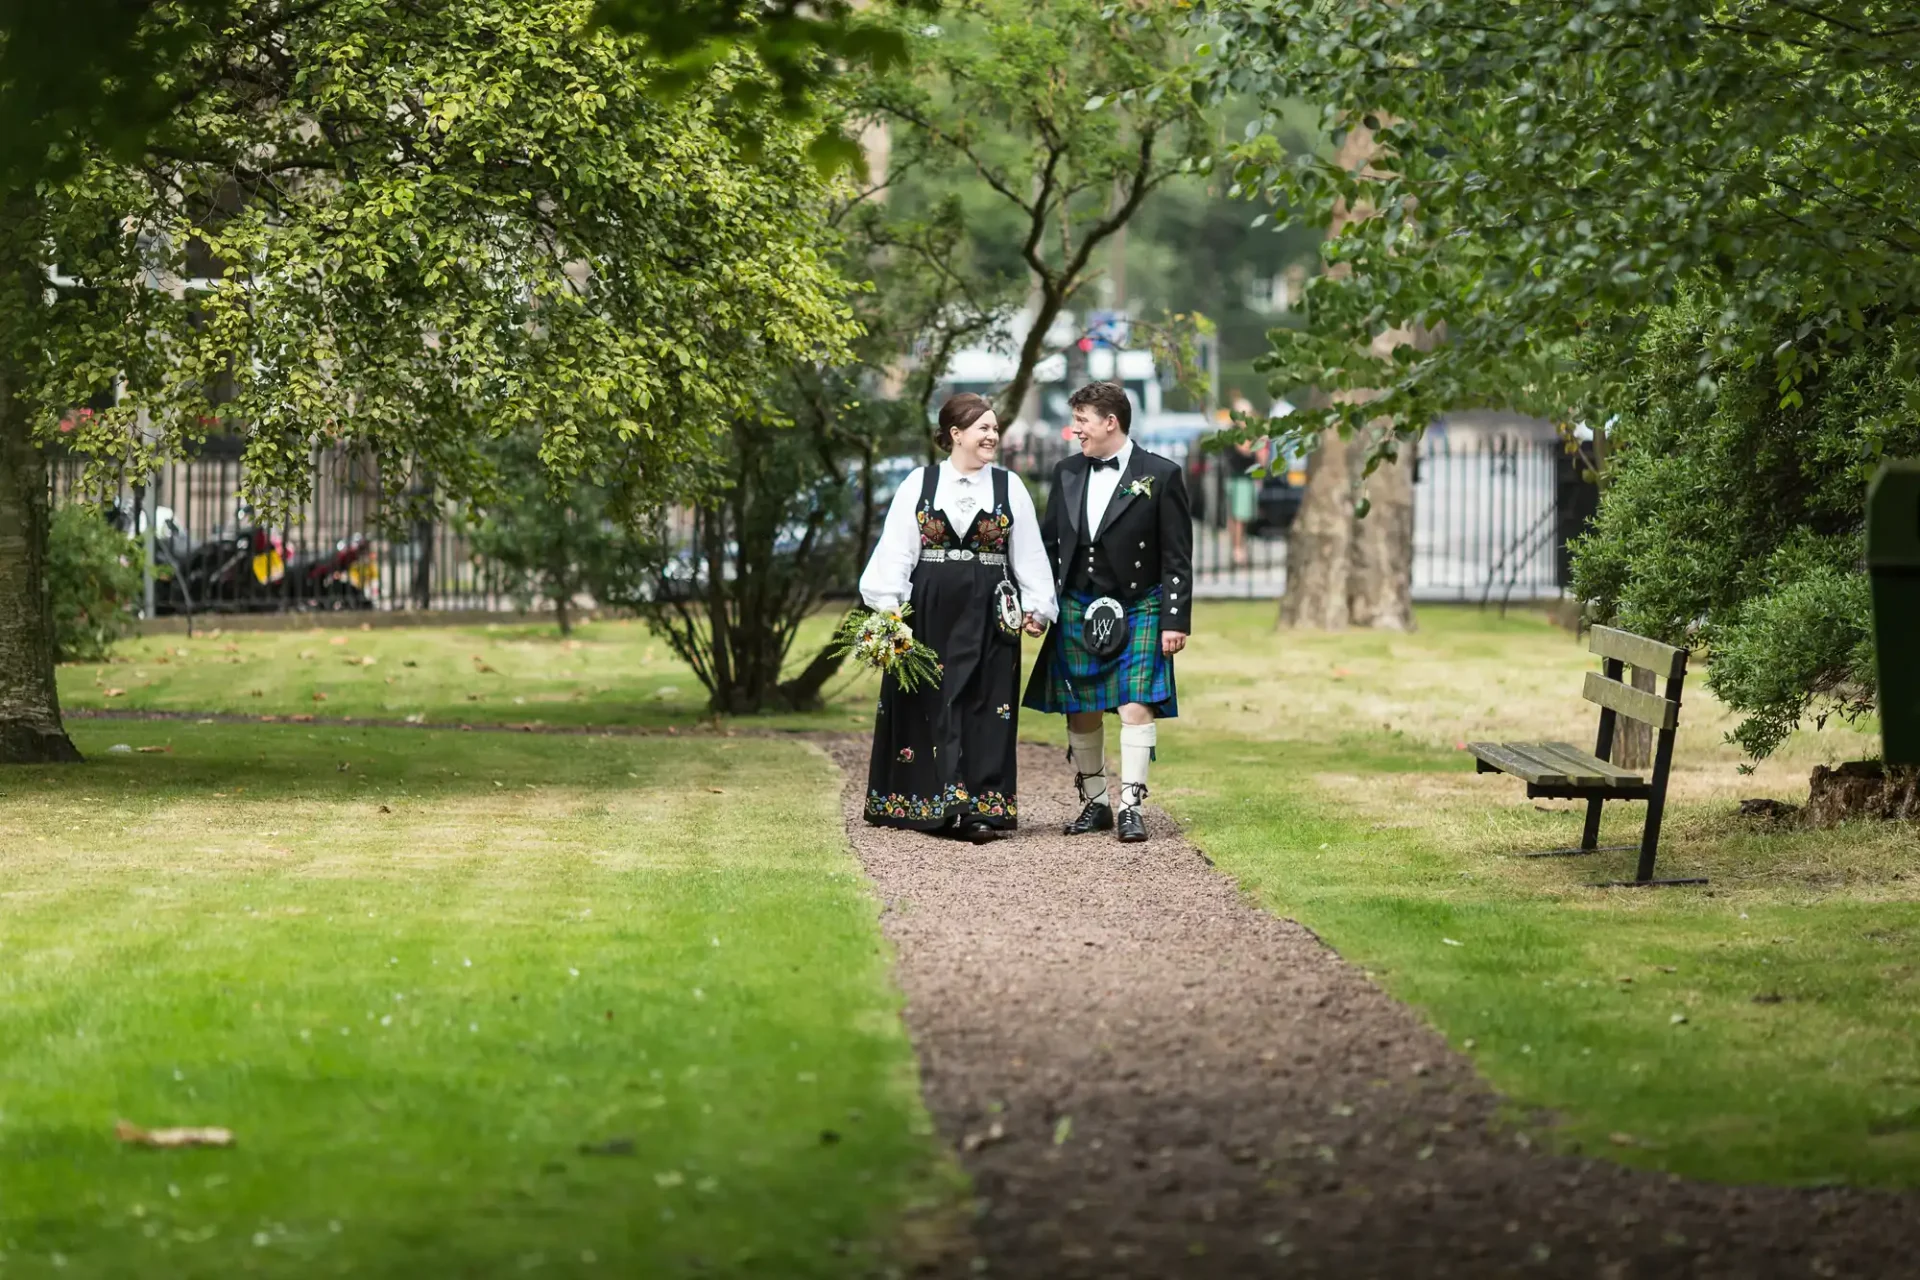 A couple in traditional scottish attire walking hand in hand along a park path, with trees and a bench in the background.